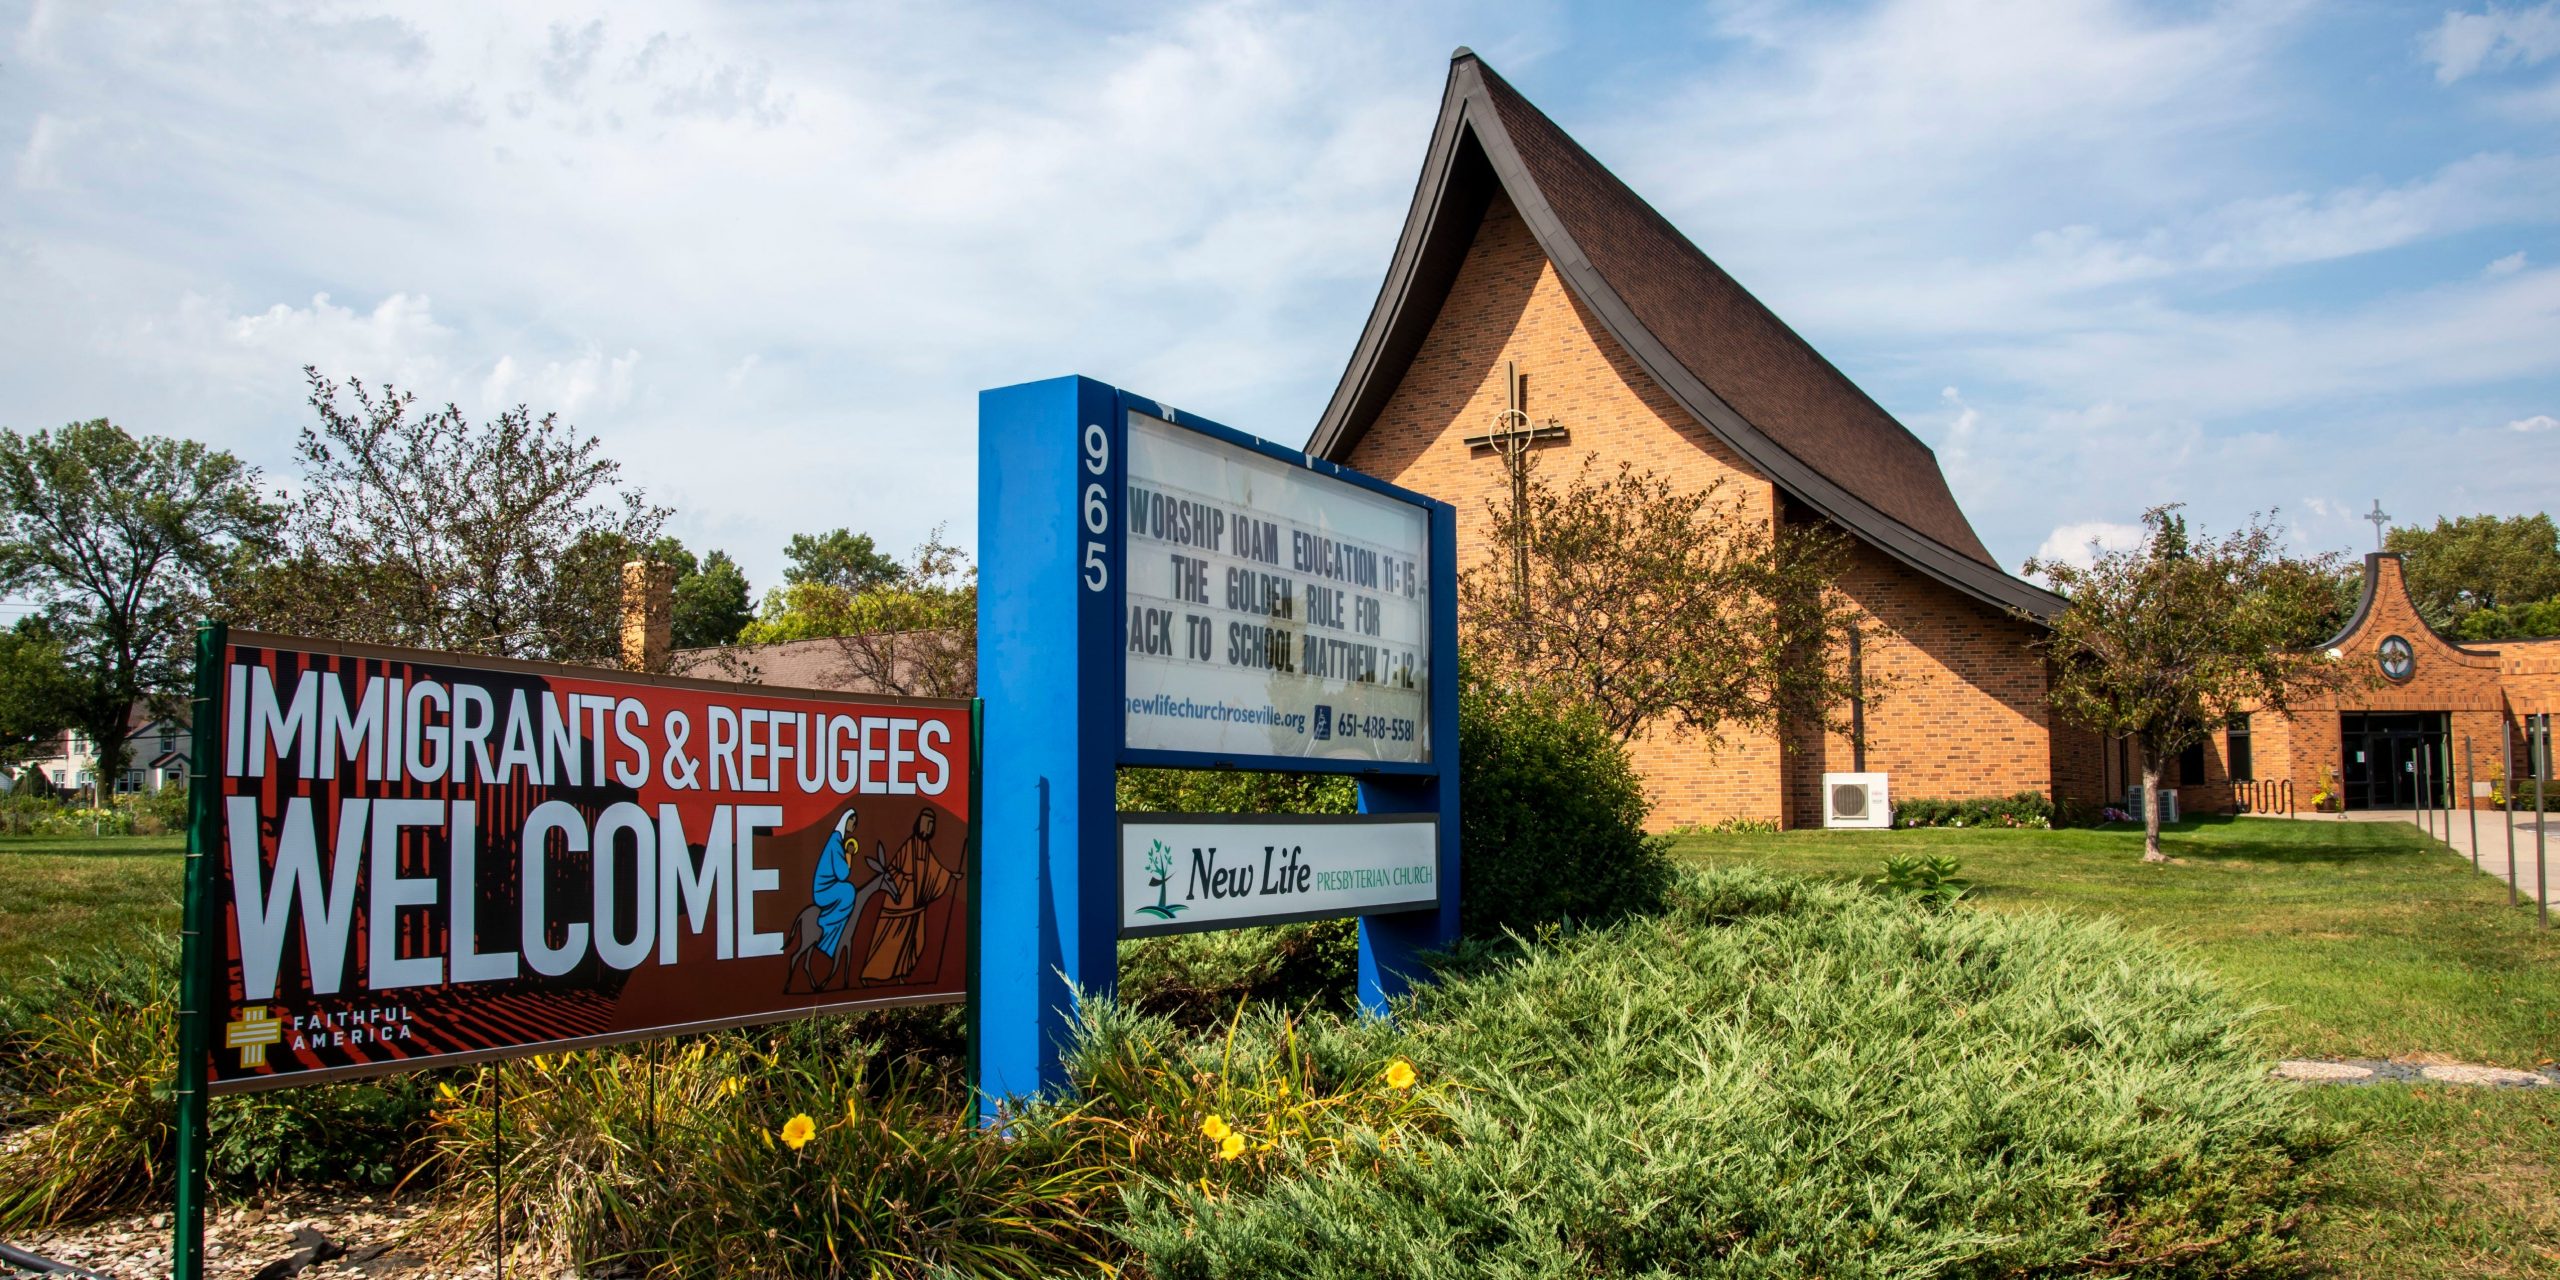 A banner in front of a church says "Immigrants & Refugees Welcome."